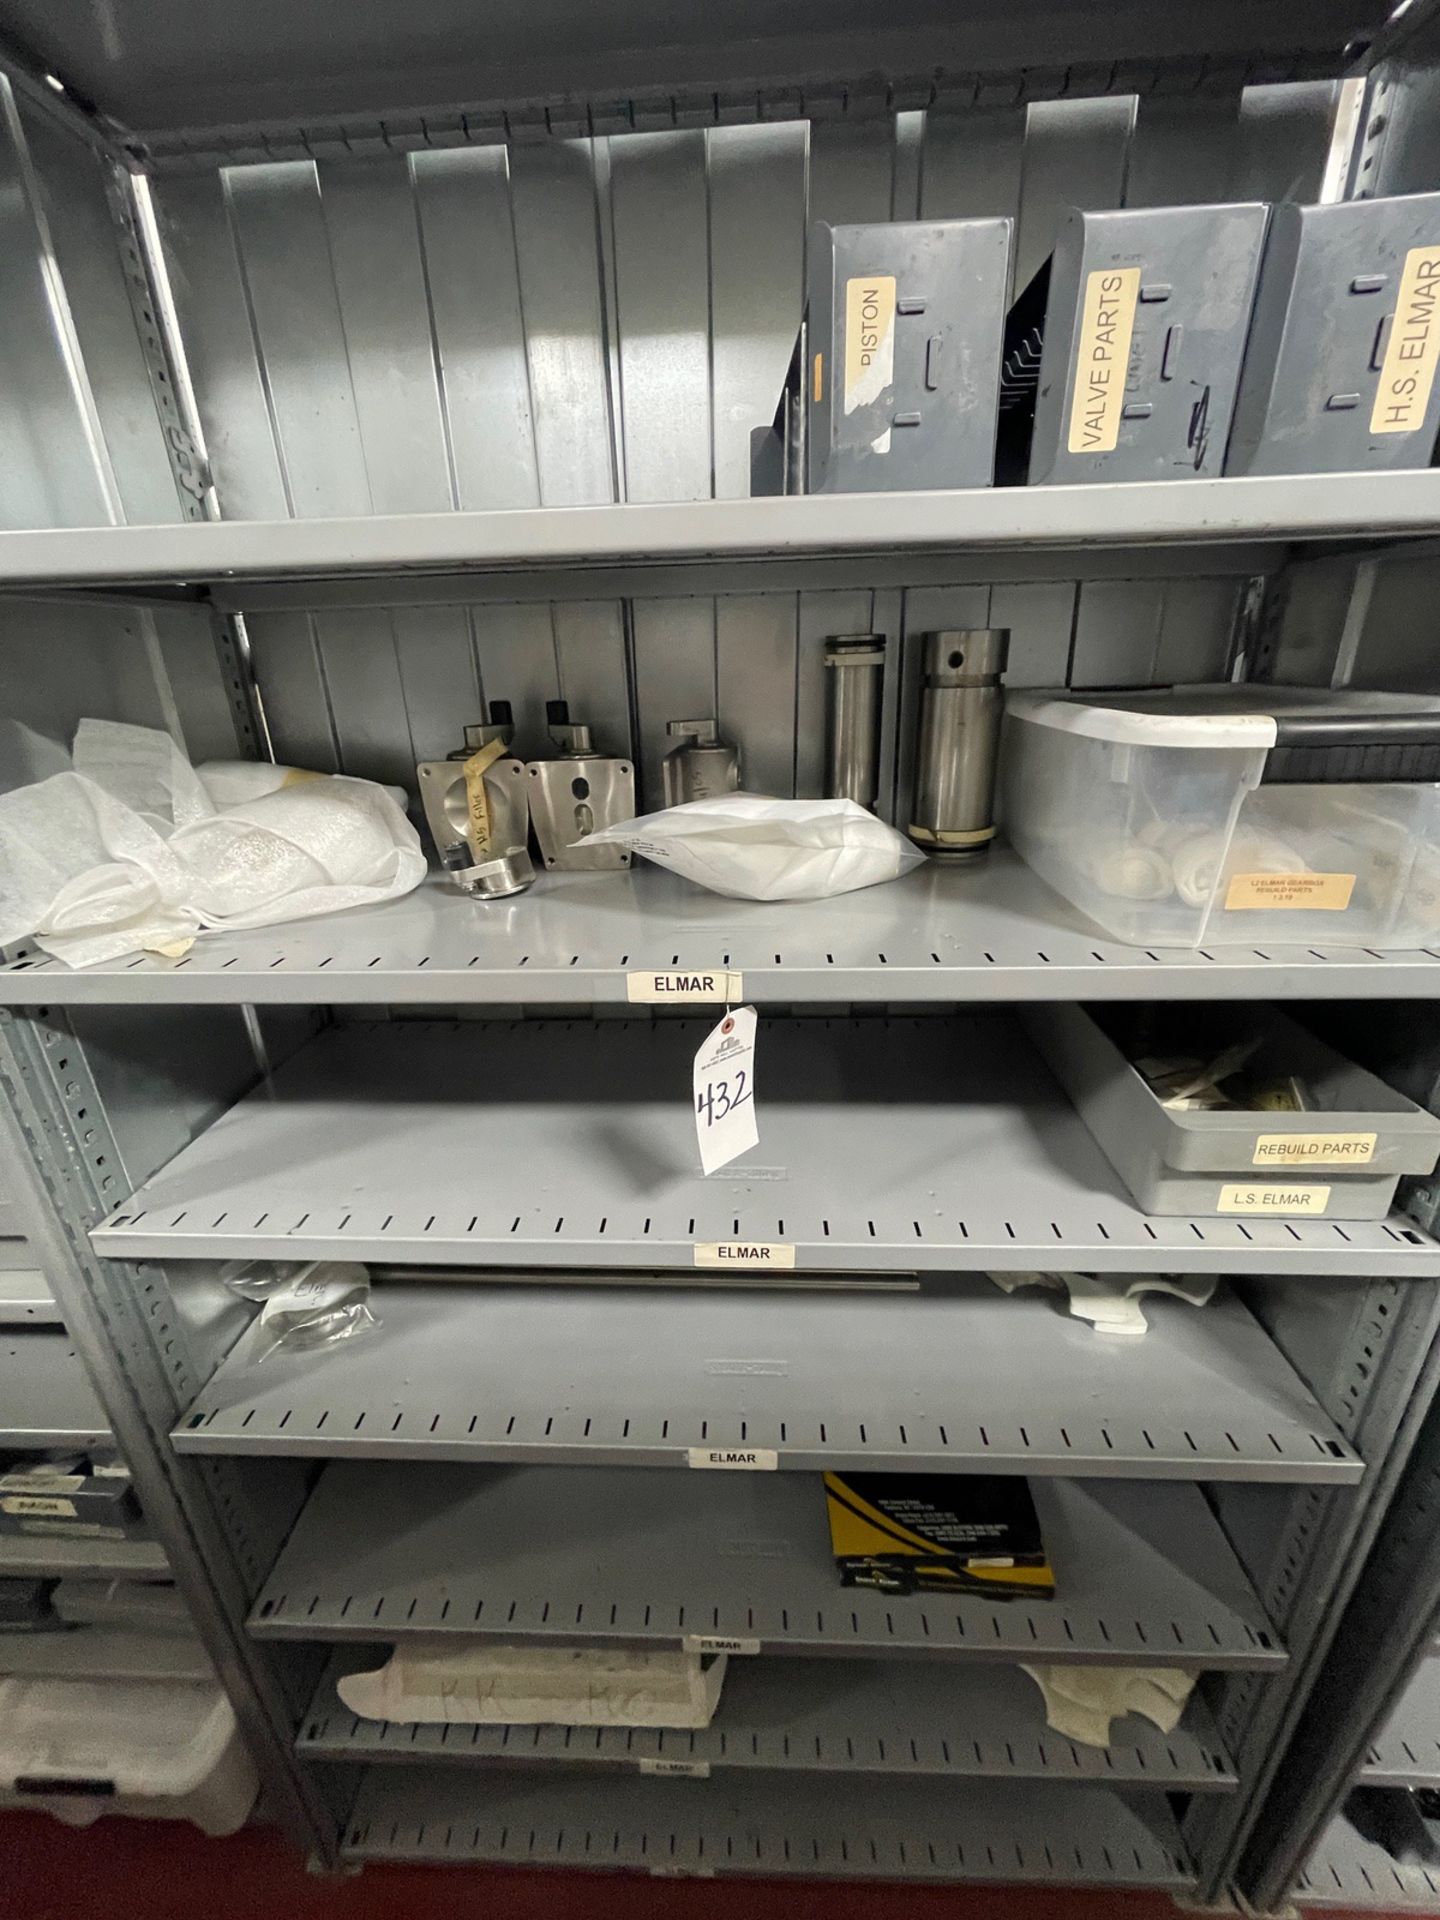 Contents of Storage Shelf Section, Spare Parts | Rig Fee $75